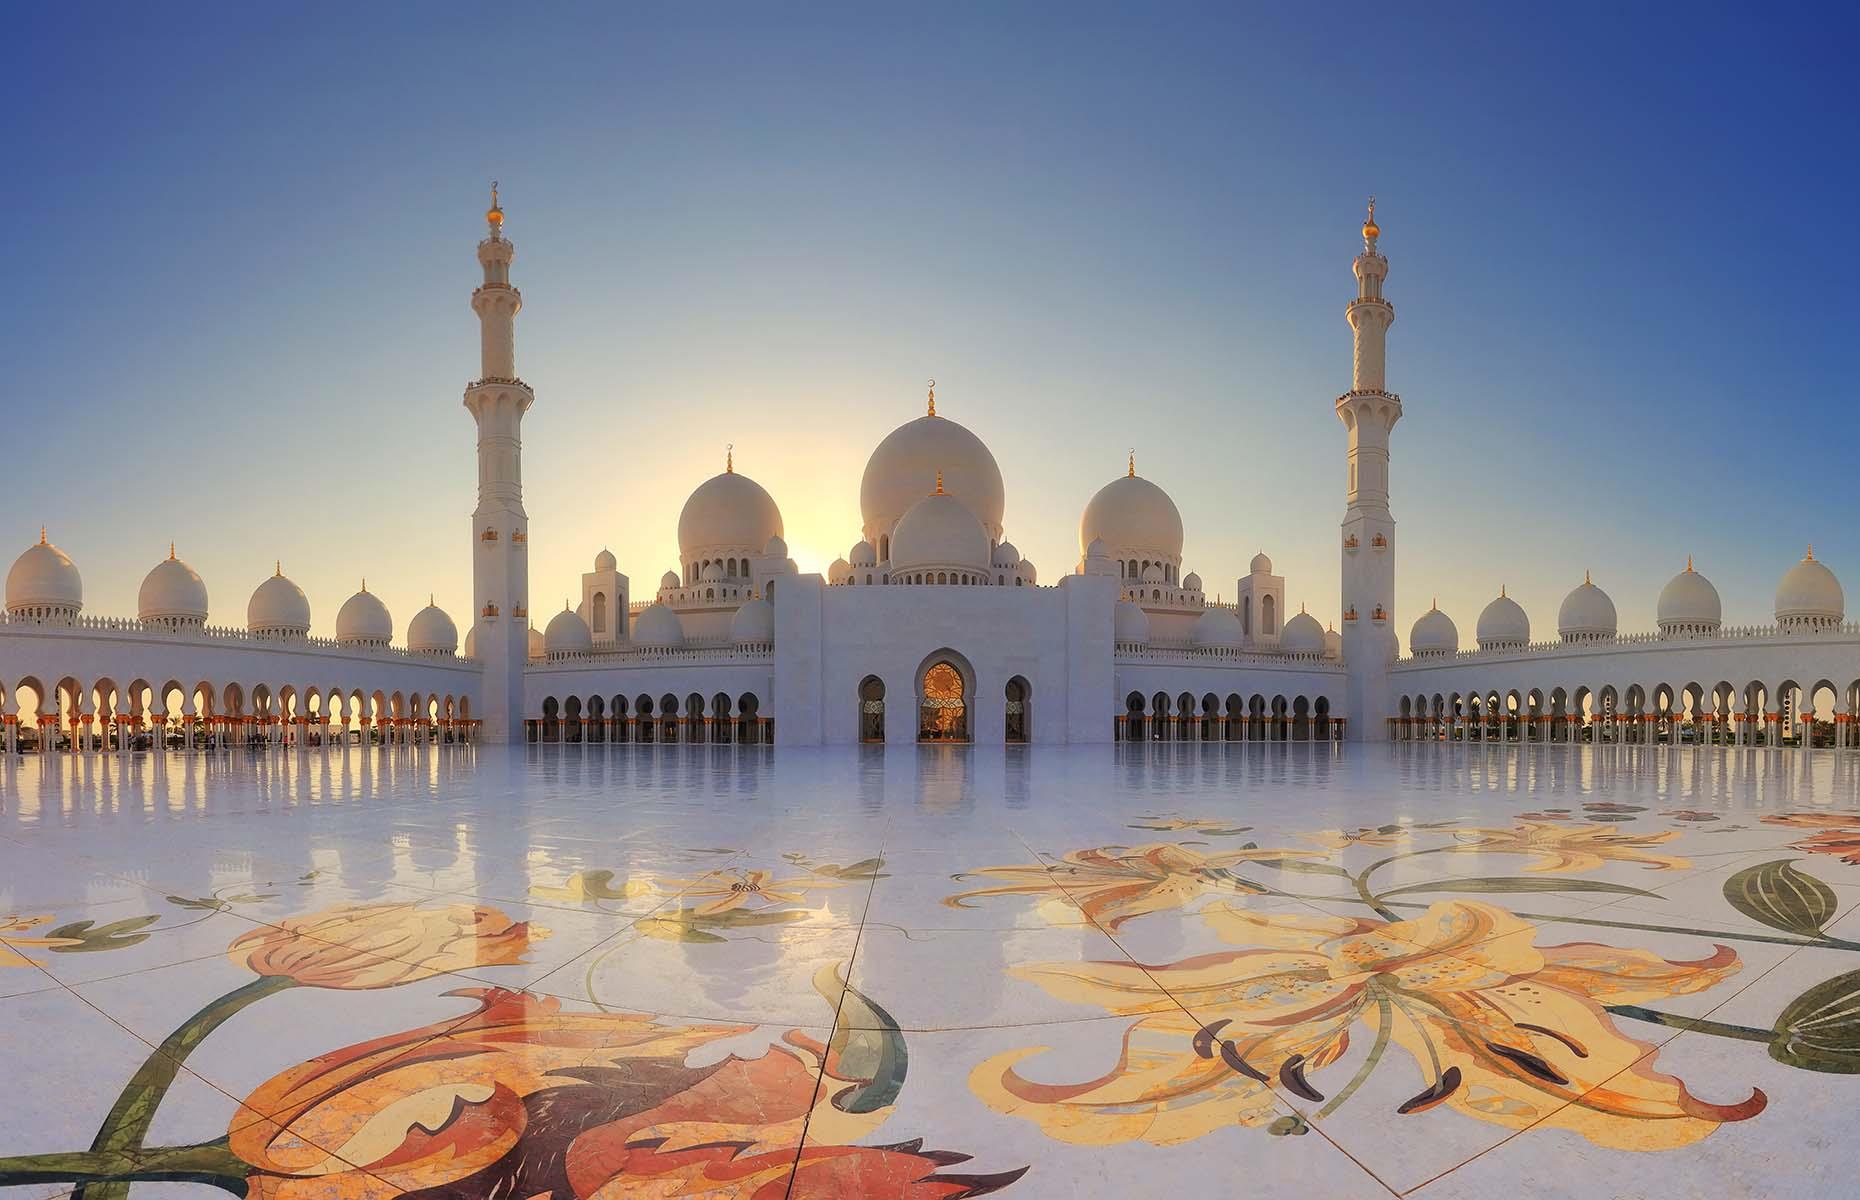 <p>It's tricky to pinpoint the most eye-catching aspect of Abu Dhabi’s spectacular mosque, completed in 2007. Could it be the piercingly tall minarets, or the 80 marble domes that form the roof? Perhaps it’s the gold-topped pillars or the sheer amount of pure white marble that makes up the modern Islamic masterpiece. It could equally be the chandeliers that shimmer in the main prayer hall, or the detailed floral designs laid into the floor. All of this together, though, places it among the most beautiful buildings in the world.</p>